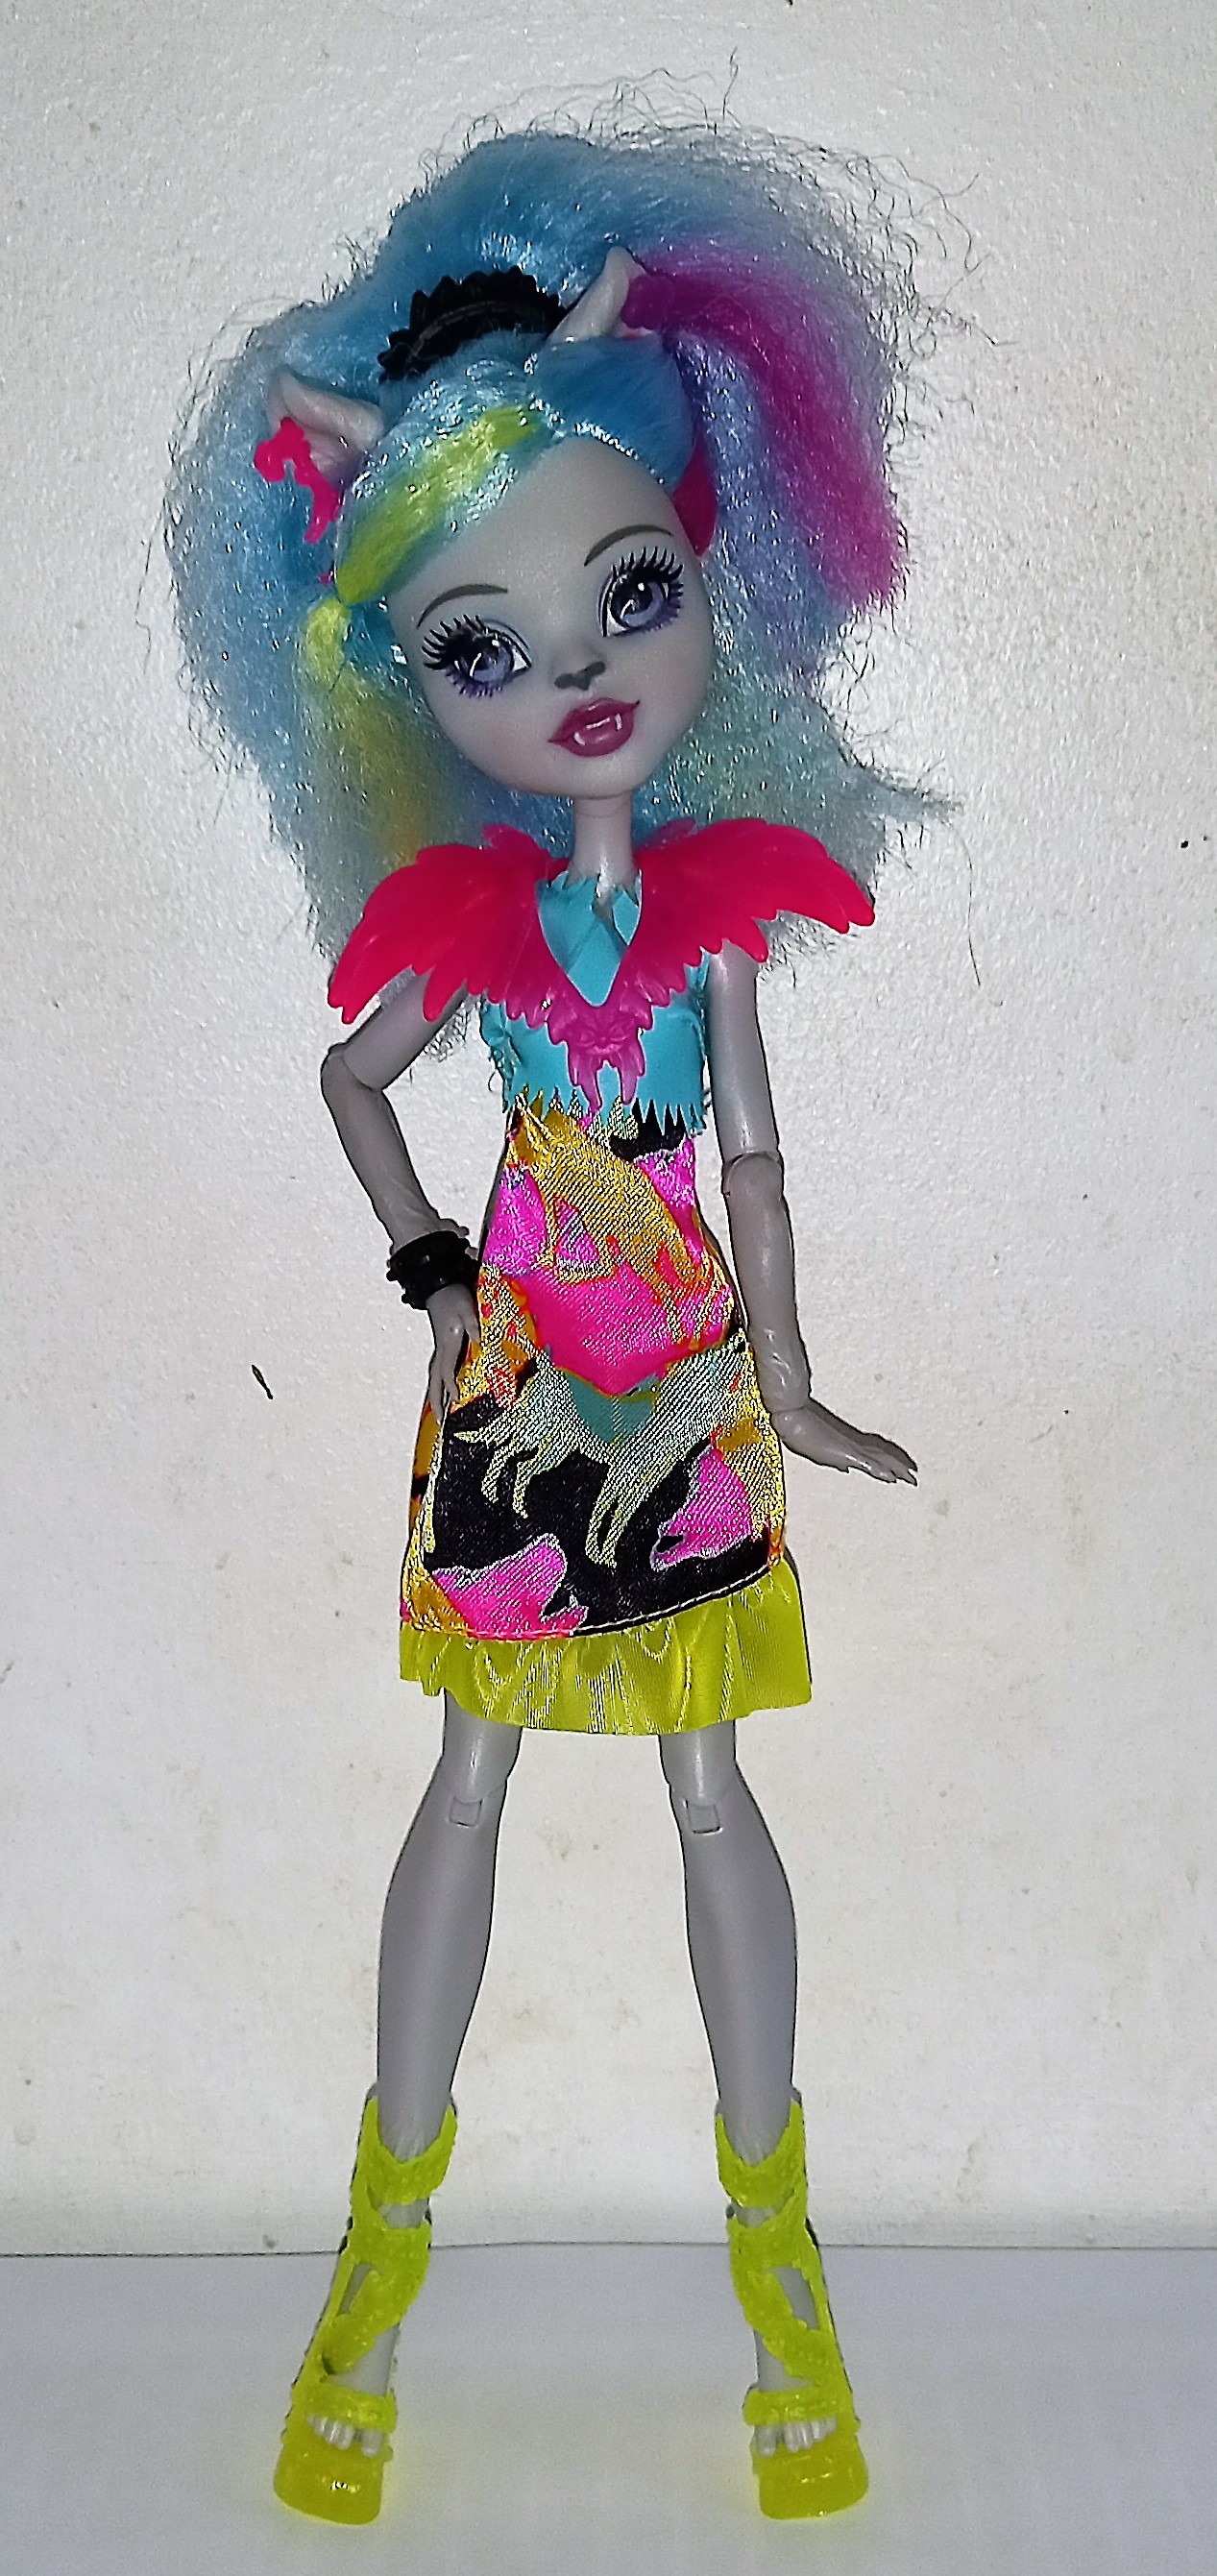 Cringe Culture is Dead — More looks at the new G3 Monster High dolls!  These